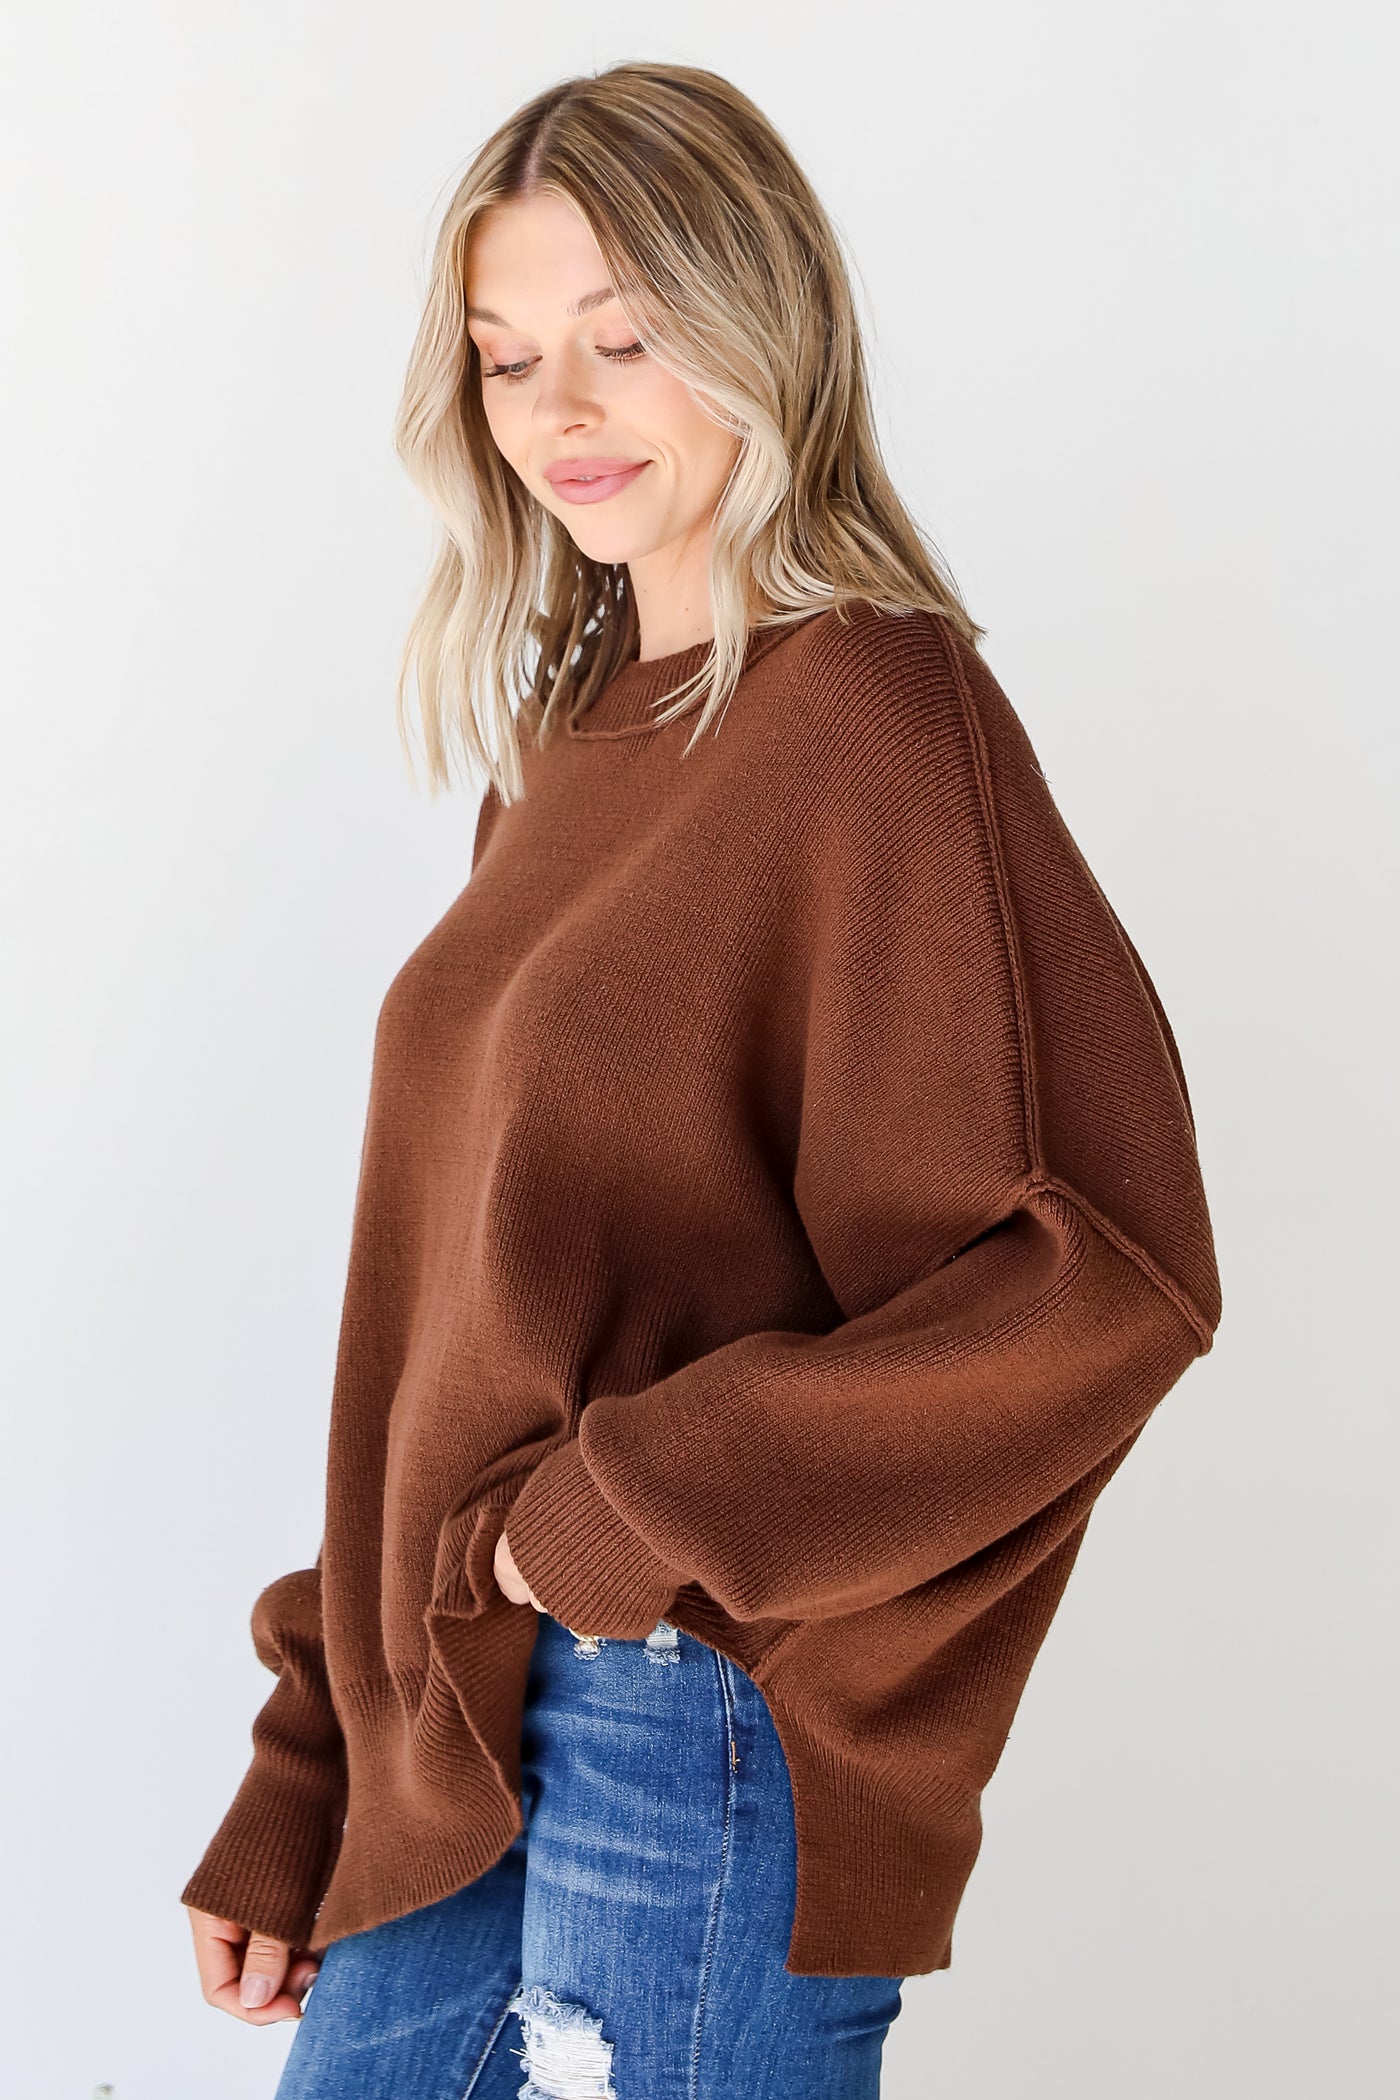 brown oversized sweater side view